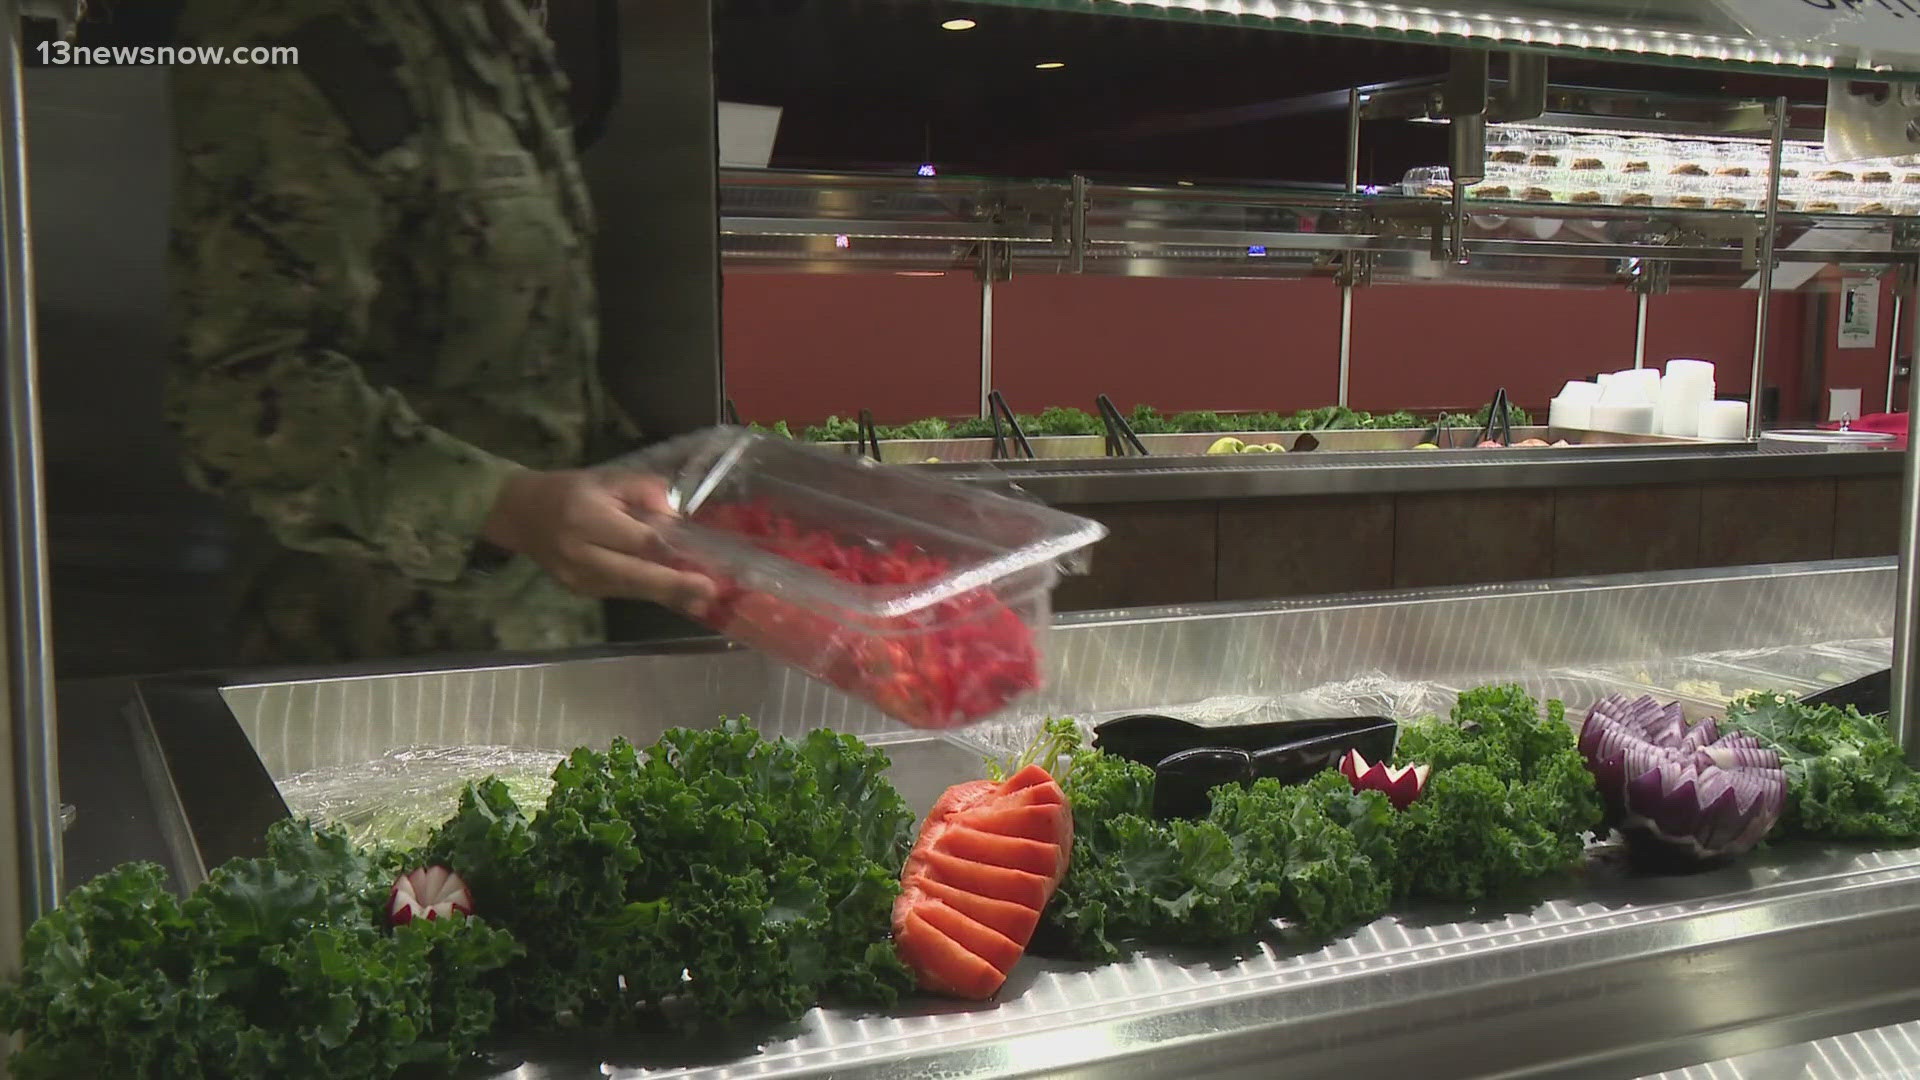 A federal watchdog is reporting problems with the military's nutrition program.